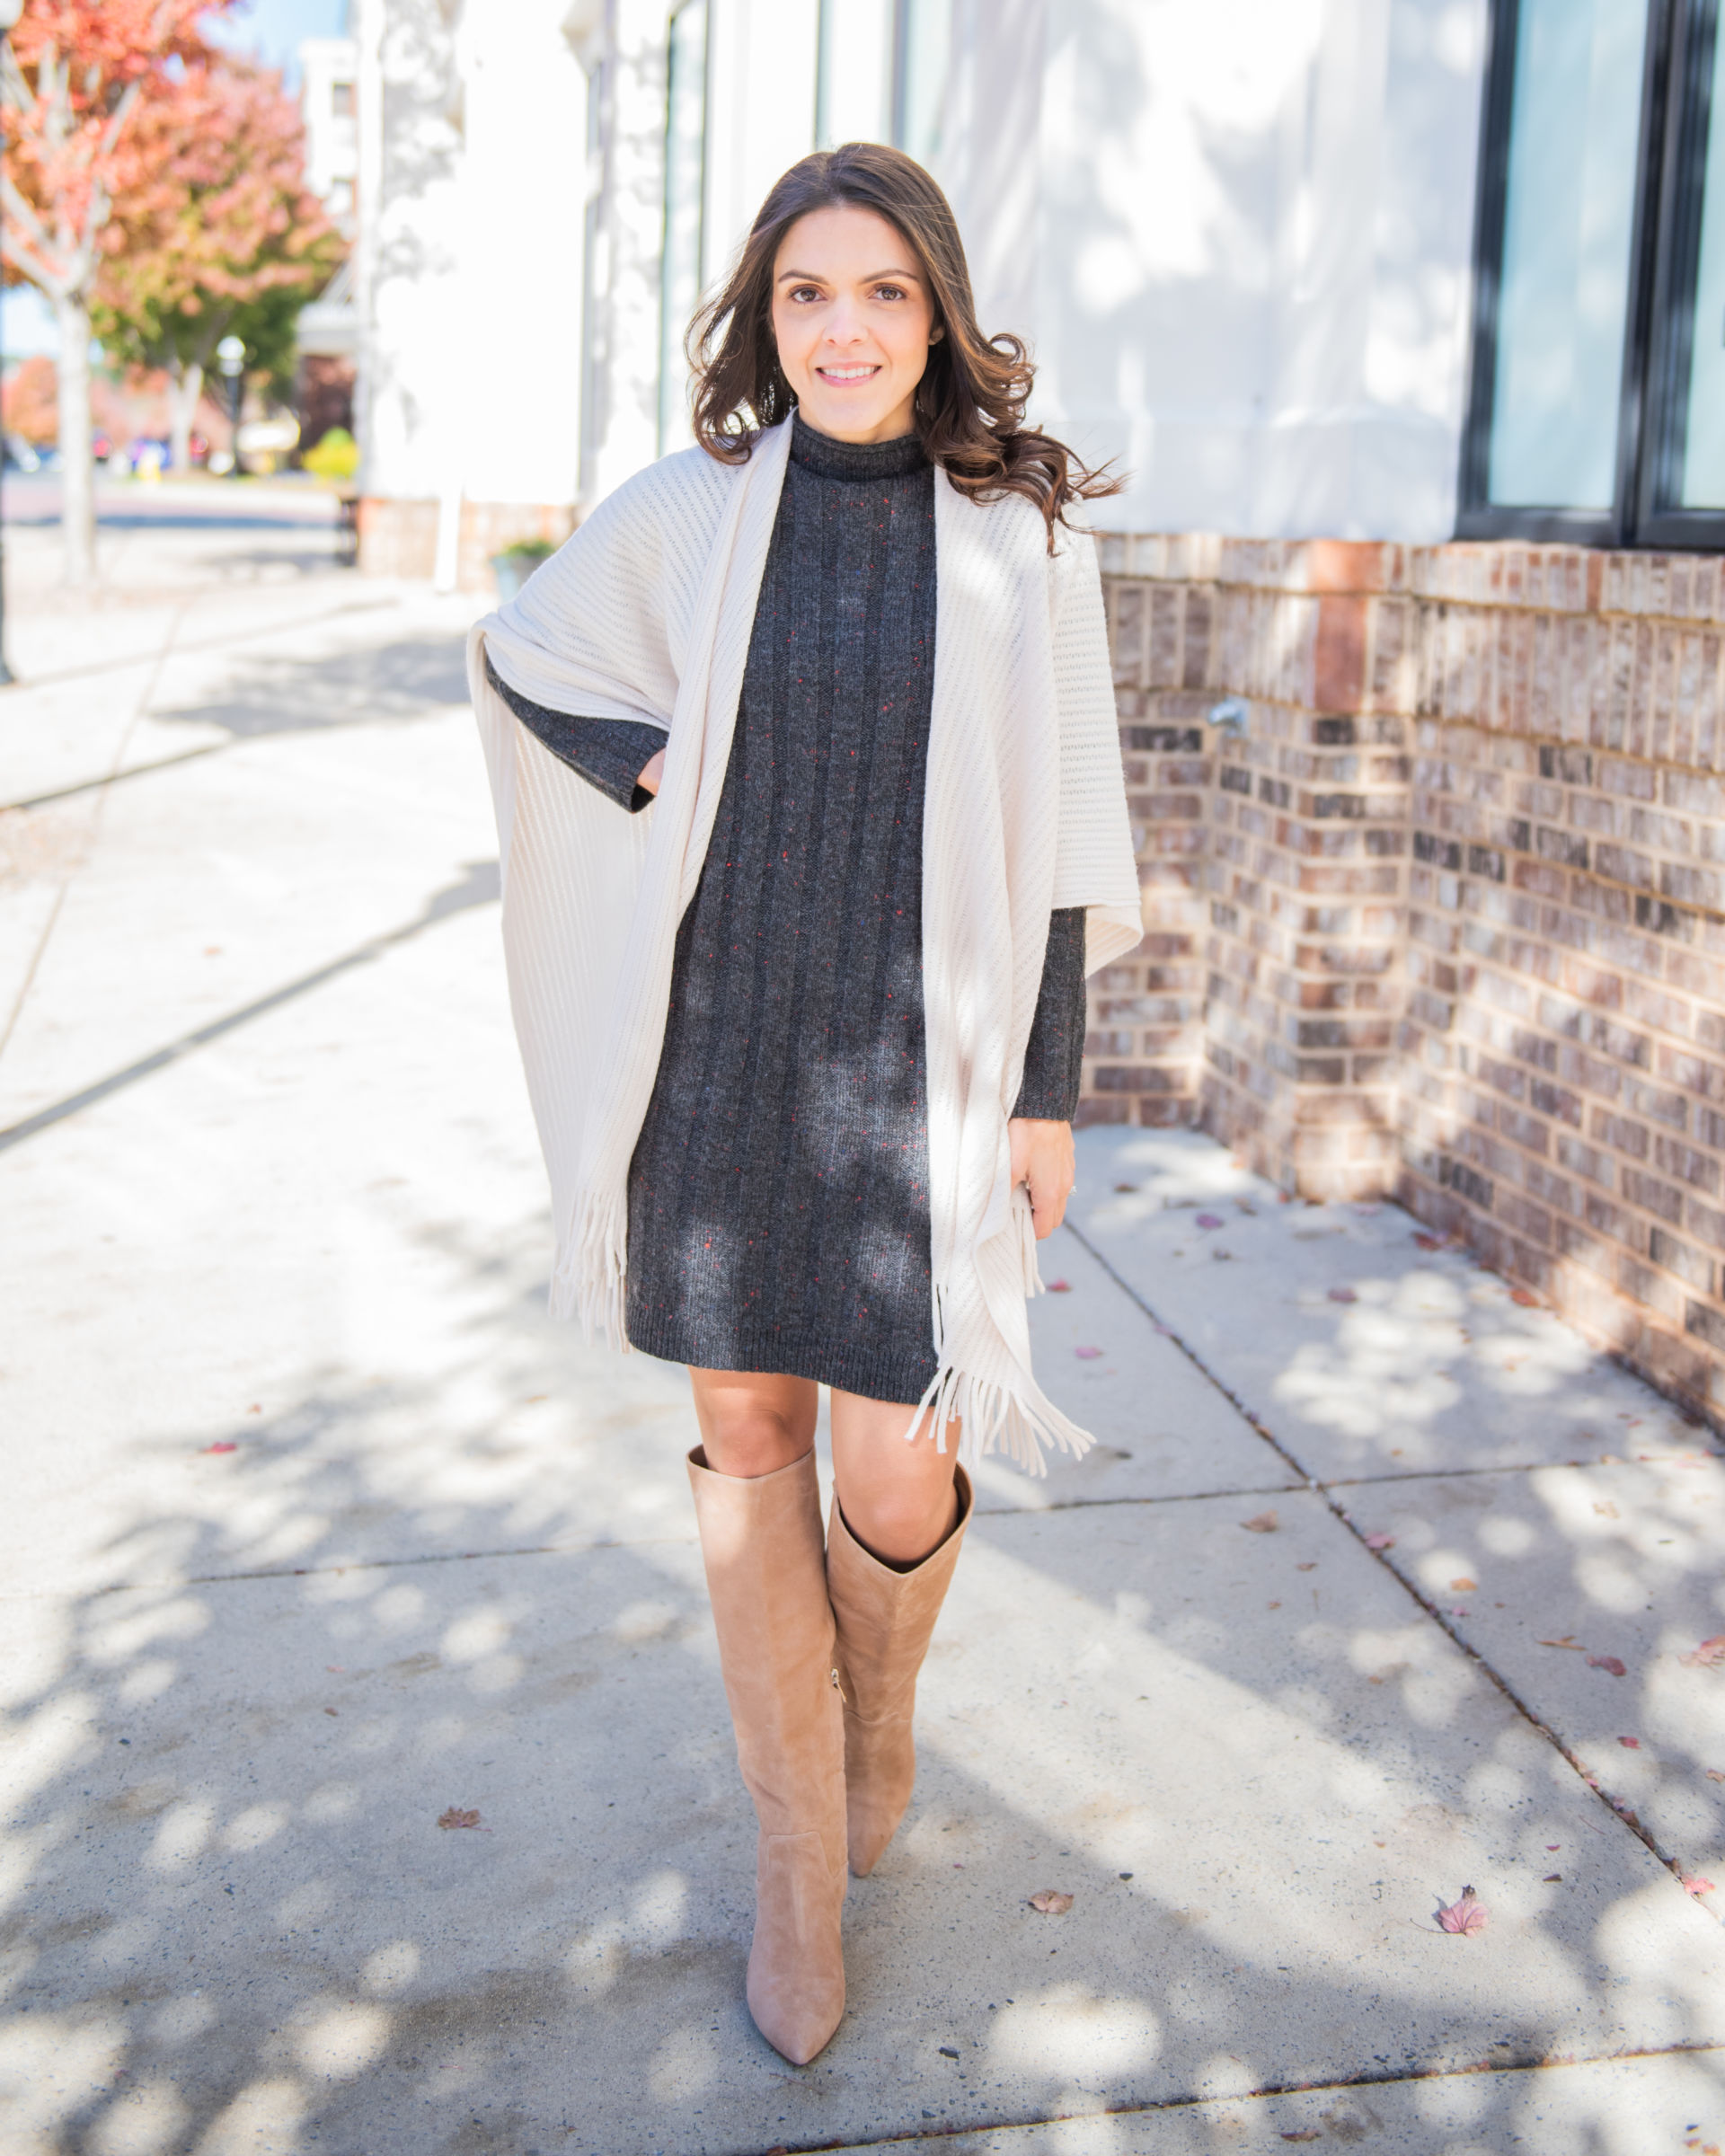 HOW TO STYLE A SWEATER DRESS FOR FALL